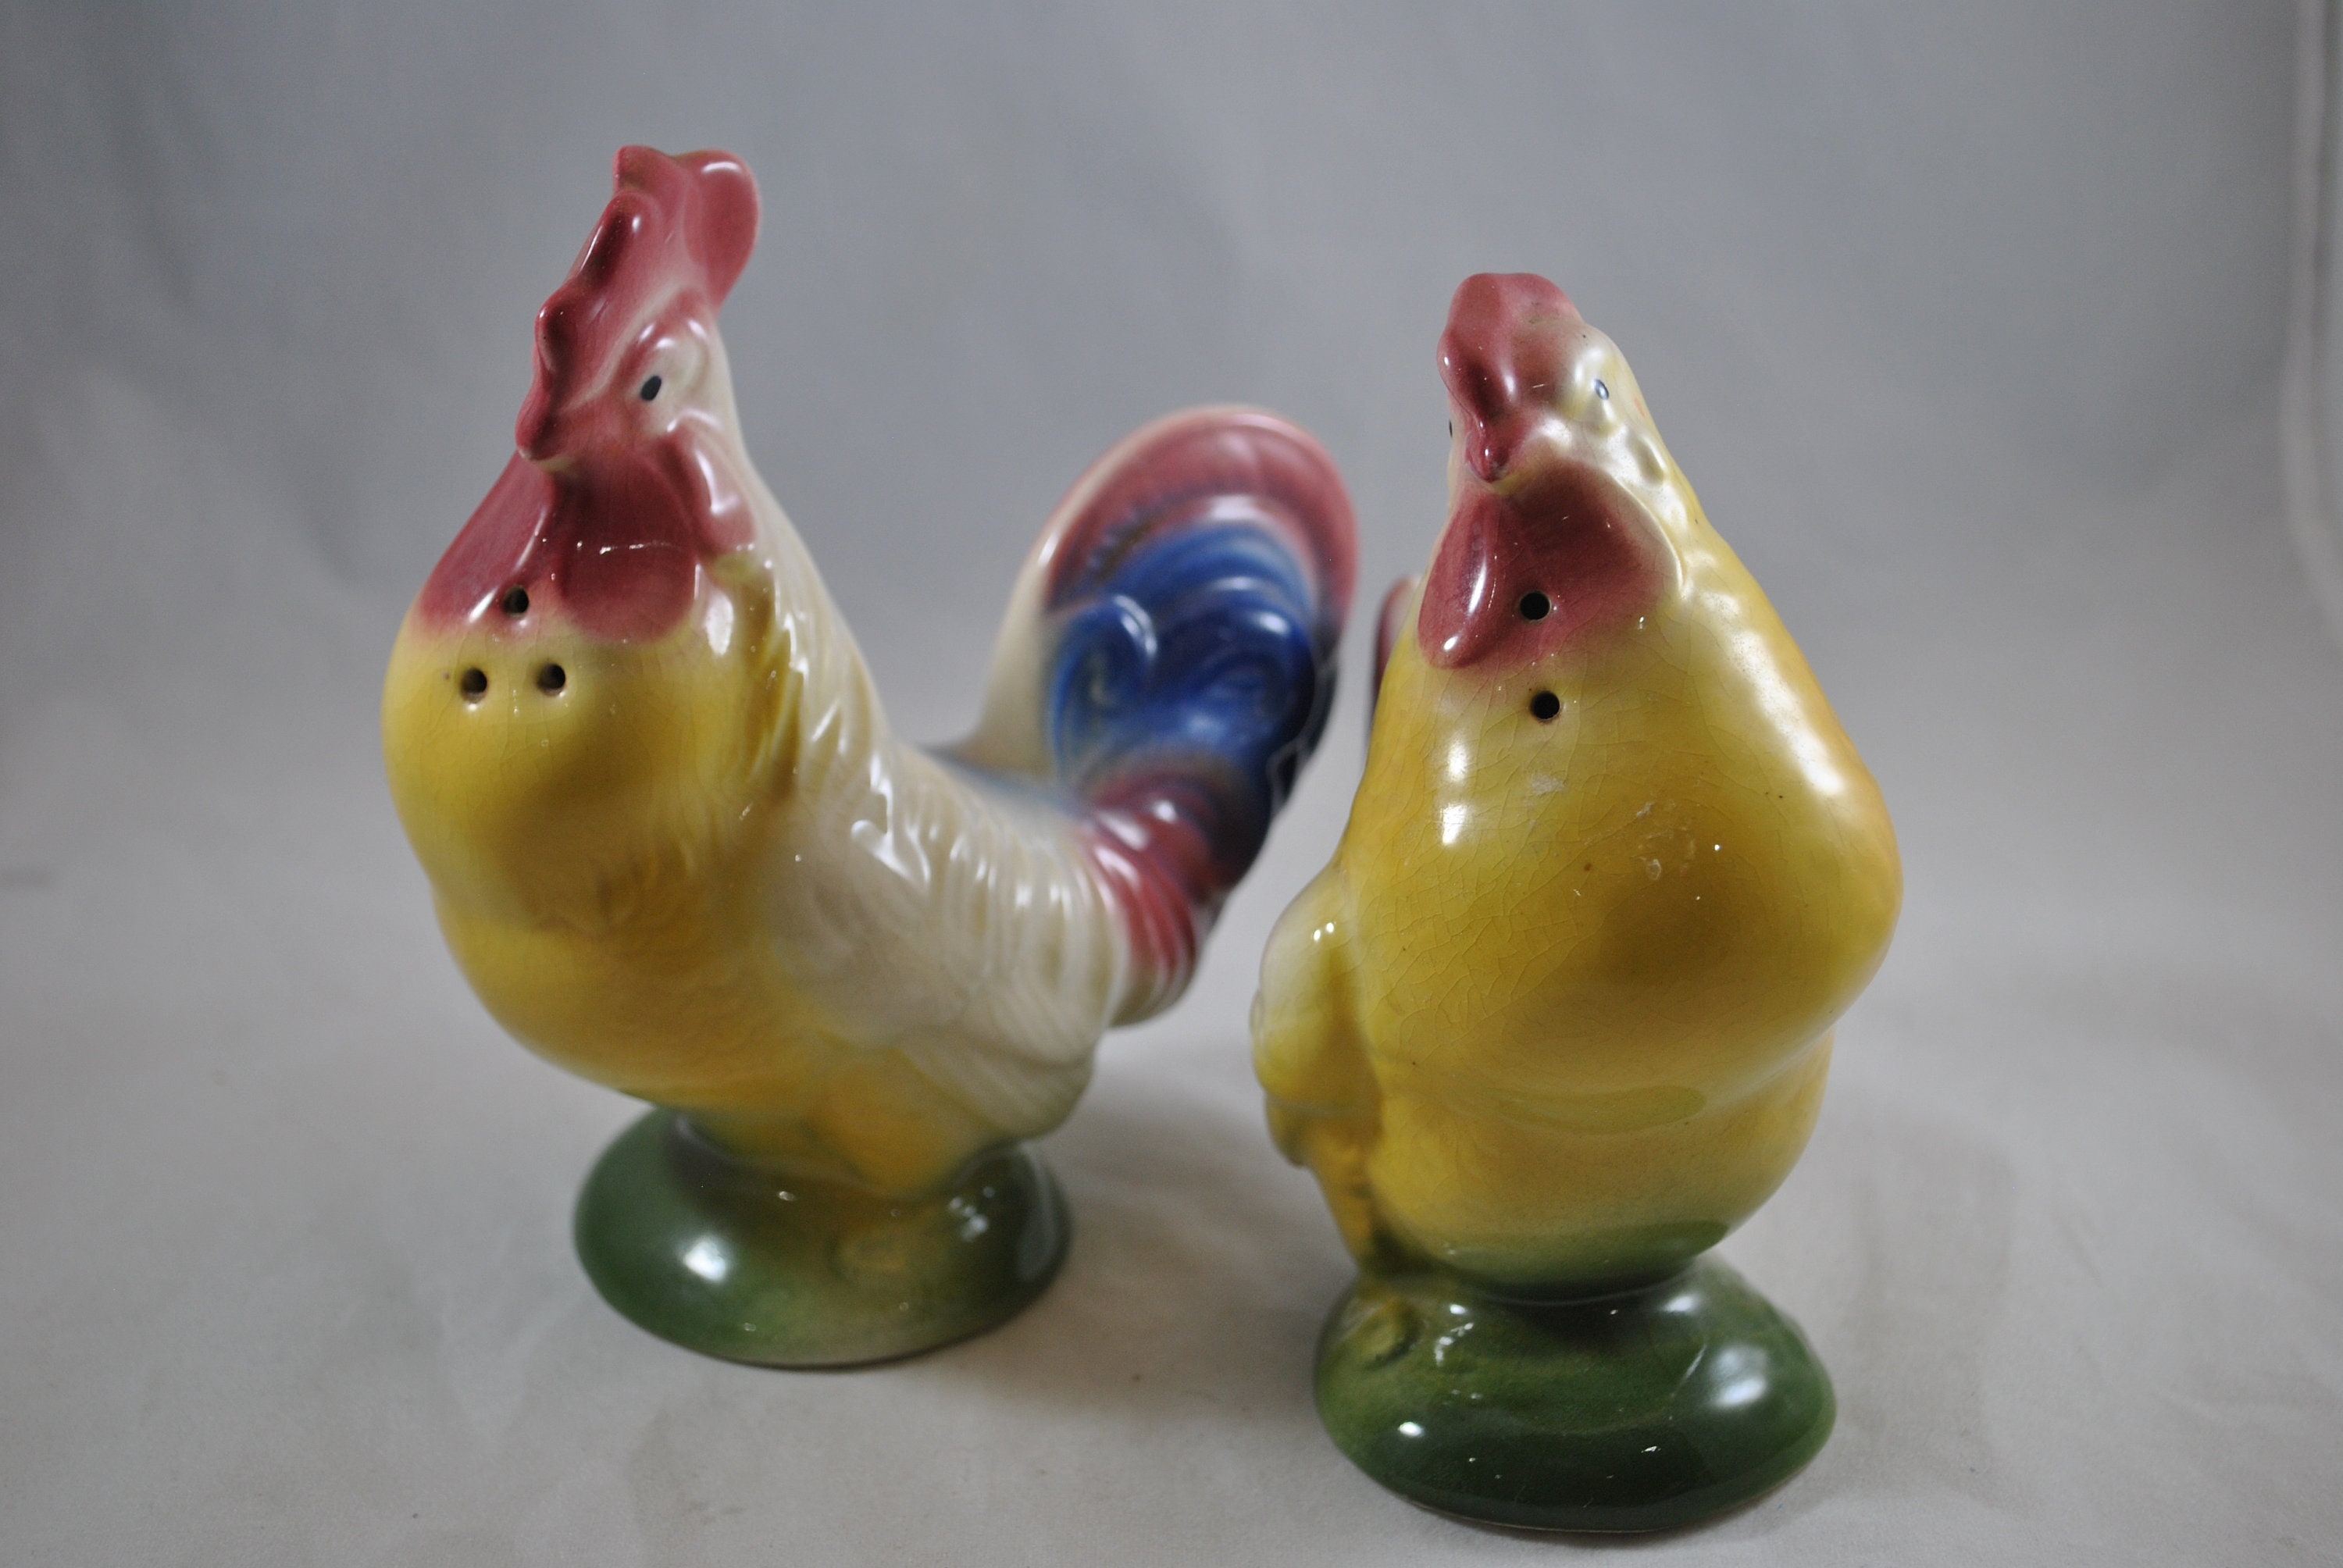 Large Rooster and Chicken Salt and Pepper Shakers - Etsy